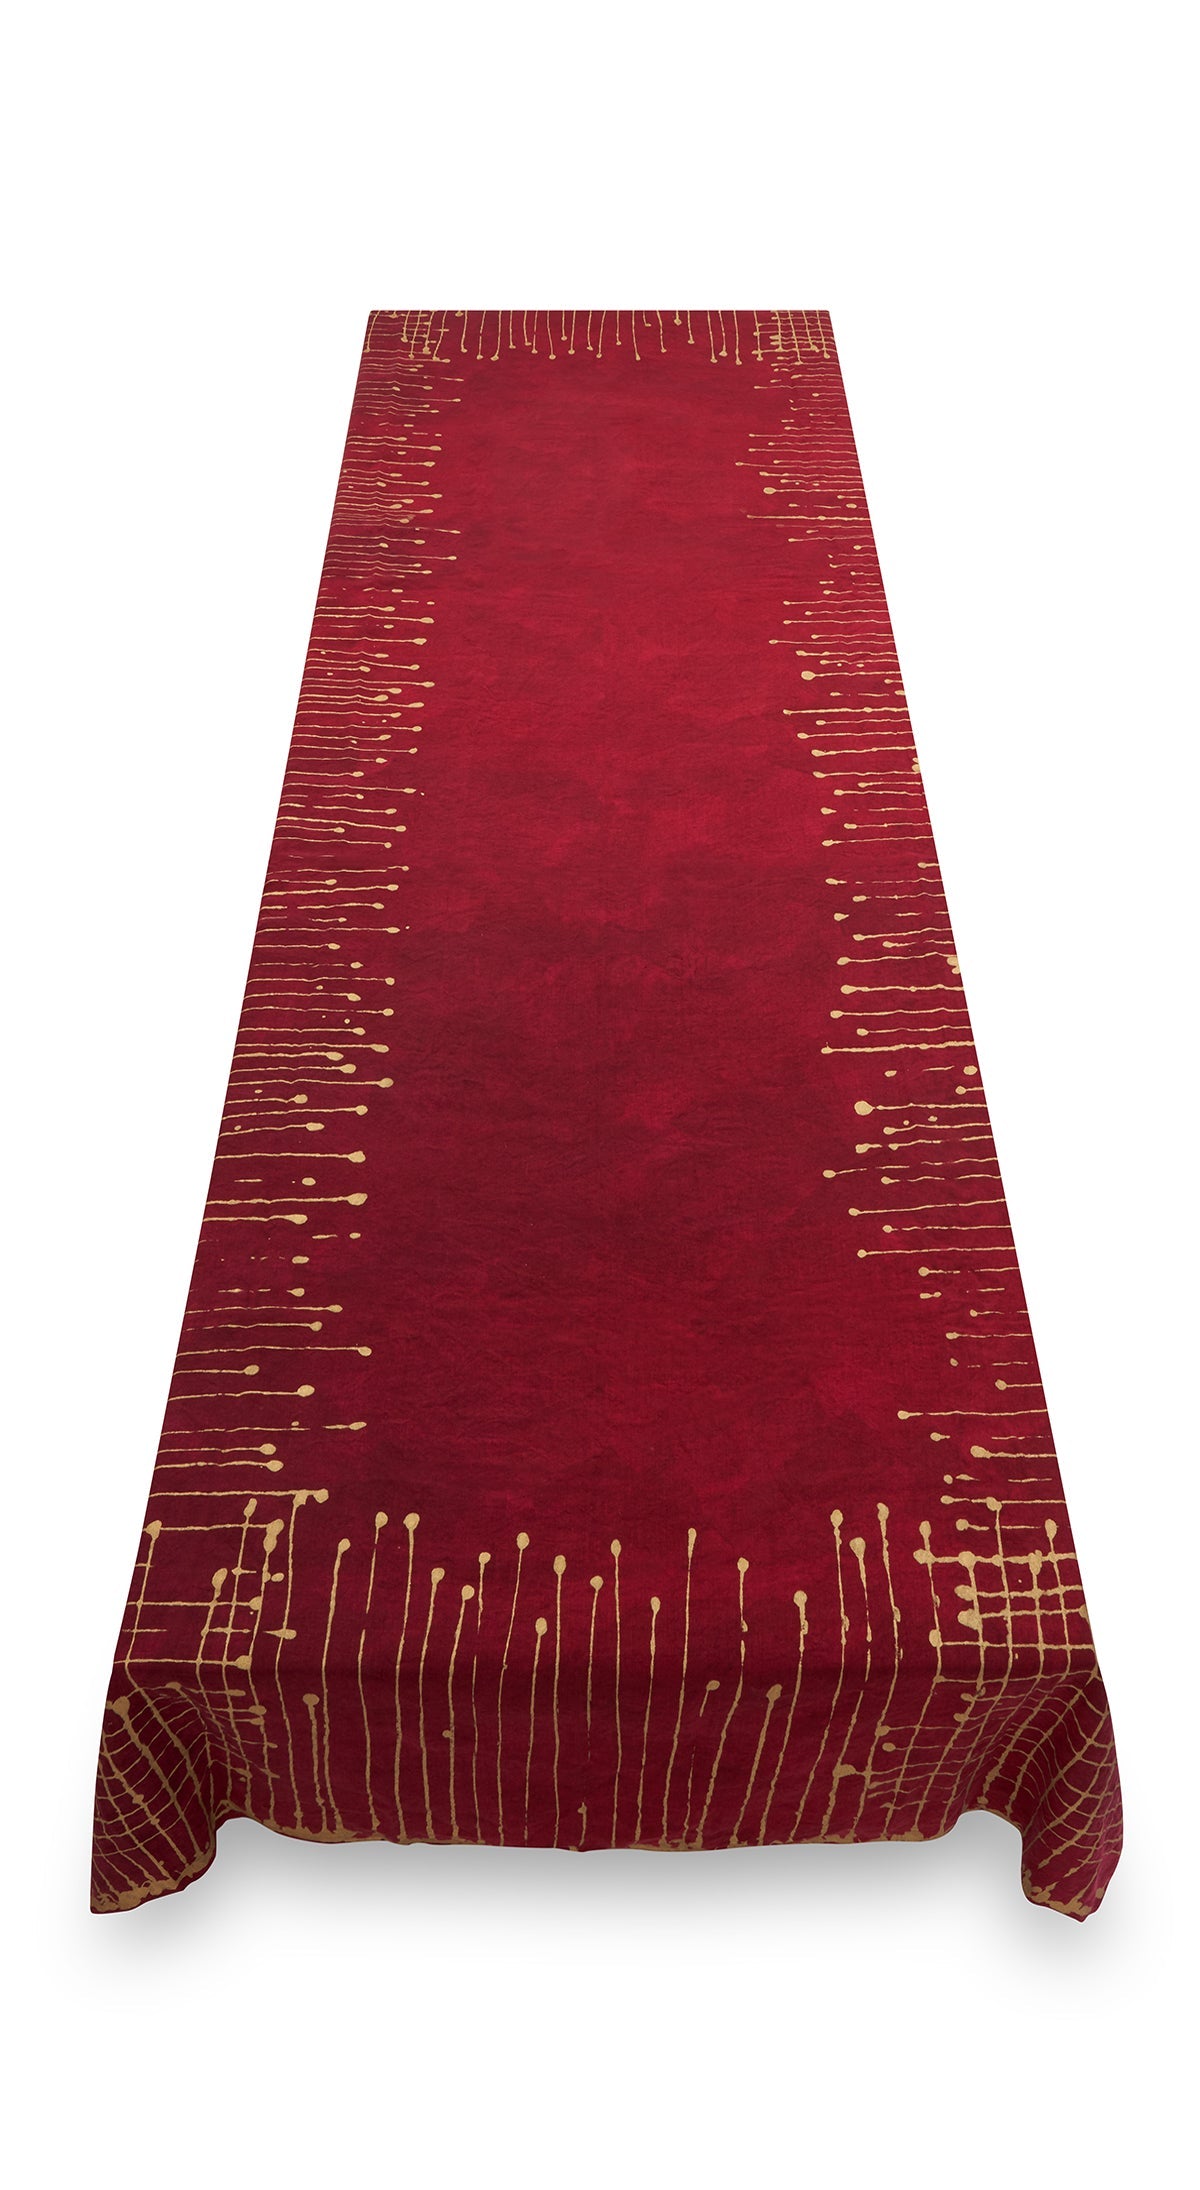 Ink Linen Tablecloth in Claret Red with Gold Drips